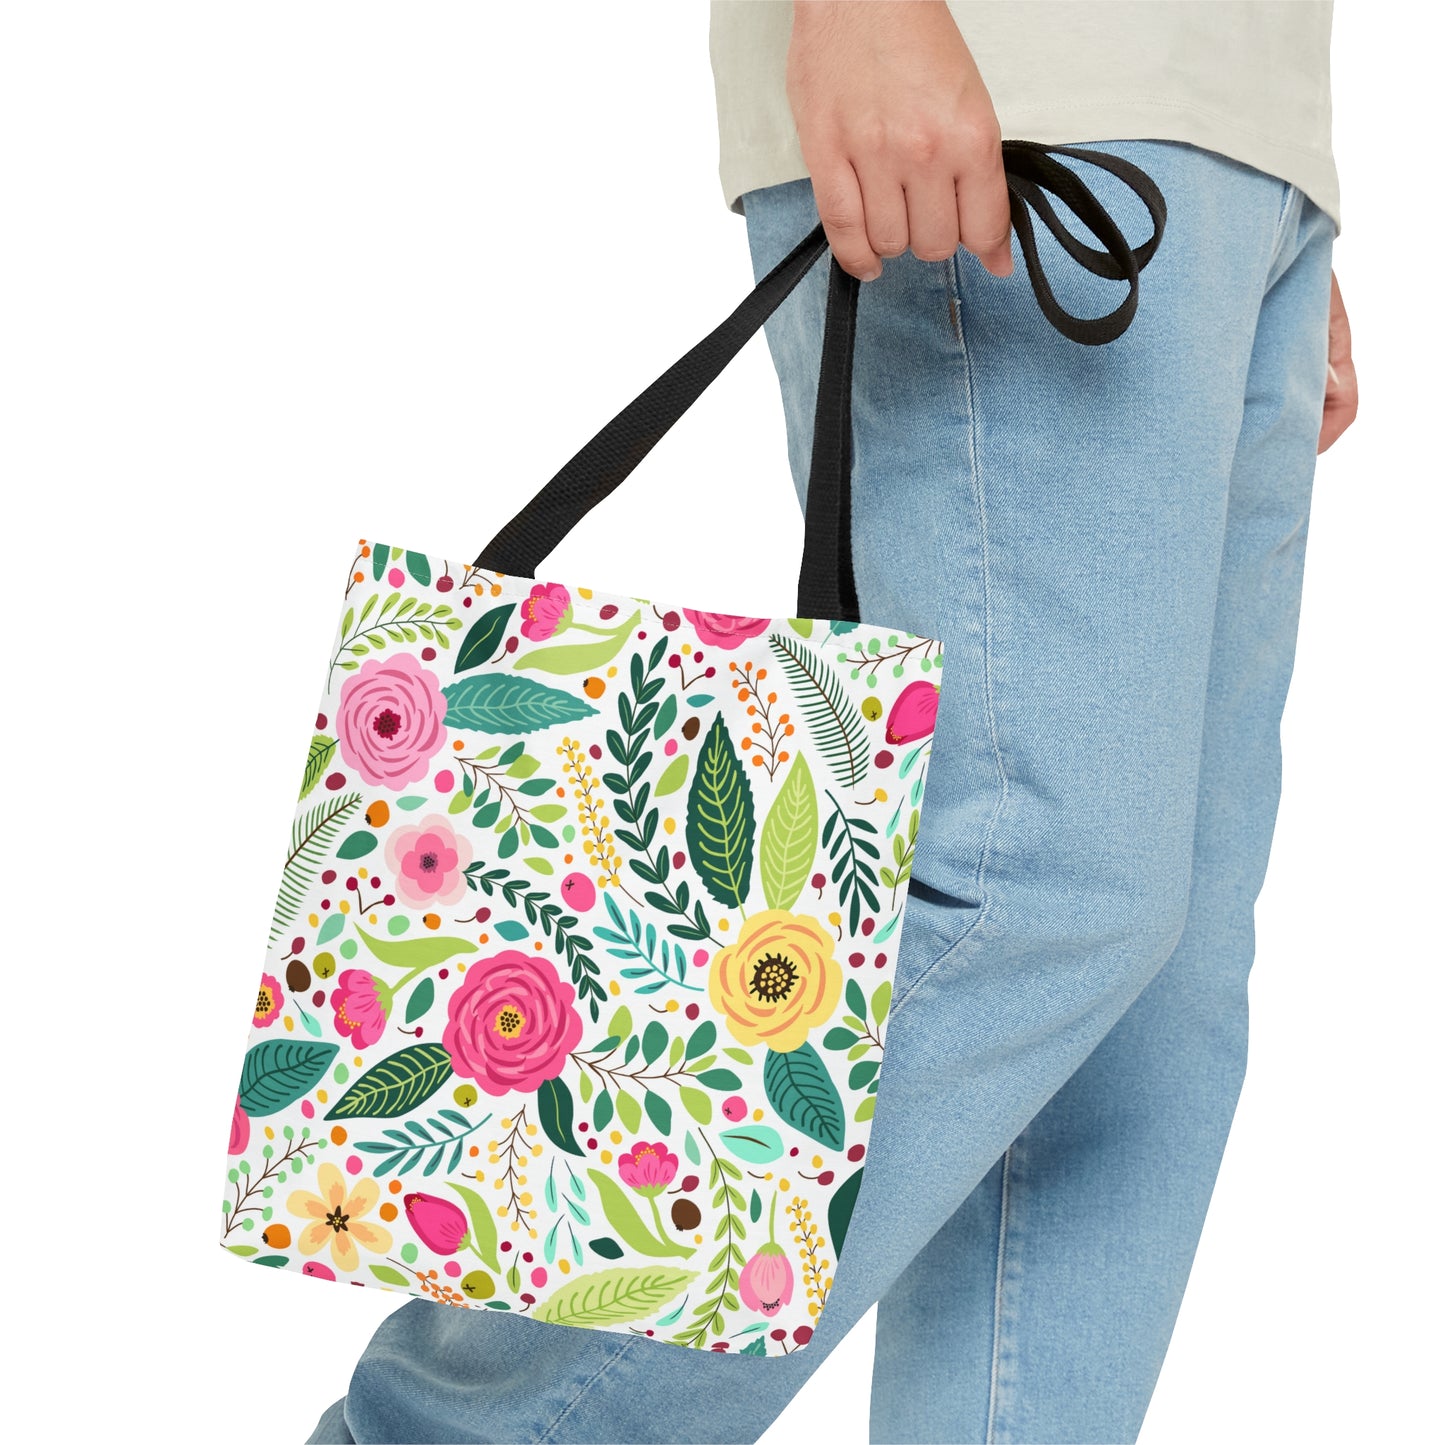 Bright Floral Tote Bag with Black Strap